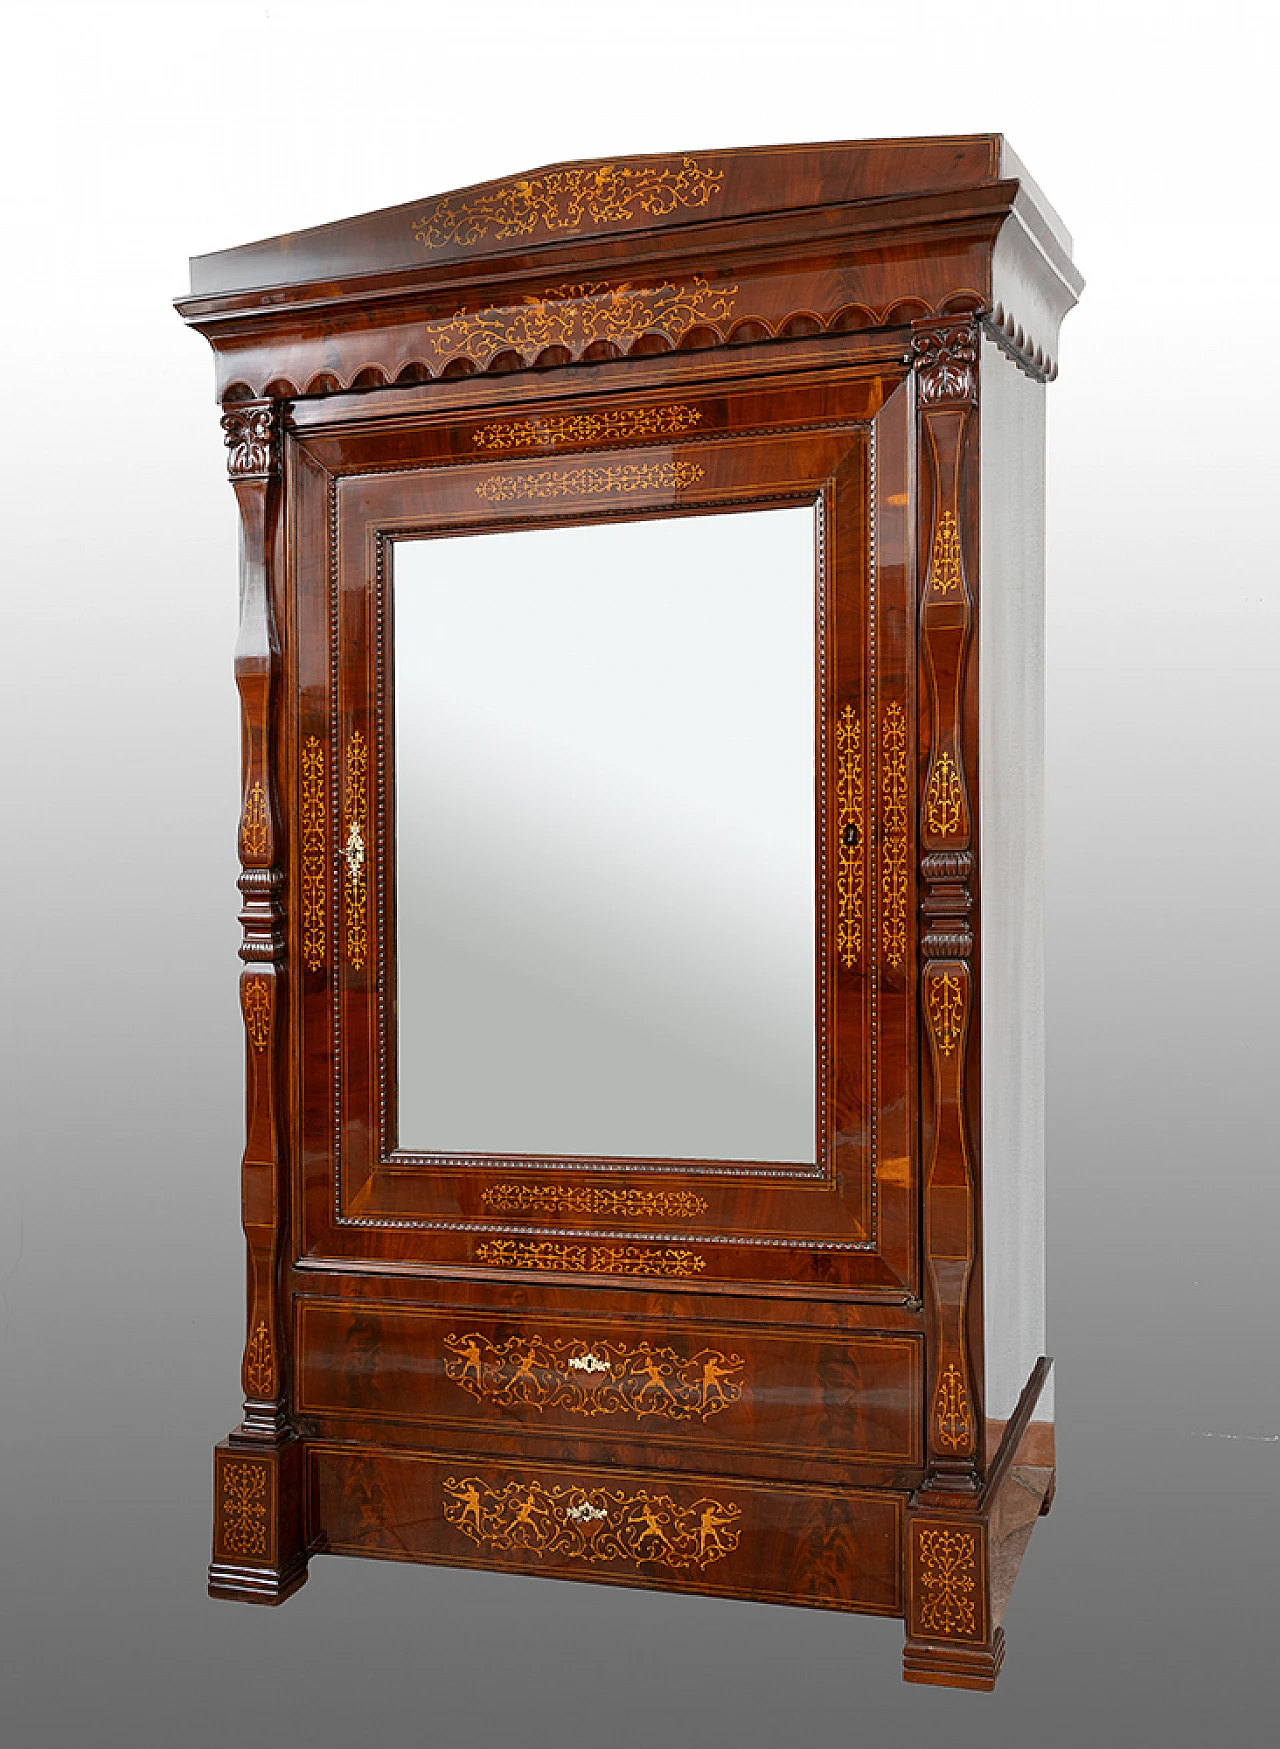 Wardrobe in mahogany and maple with mirror and 2 drawers, 19th century 1